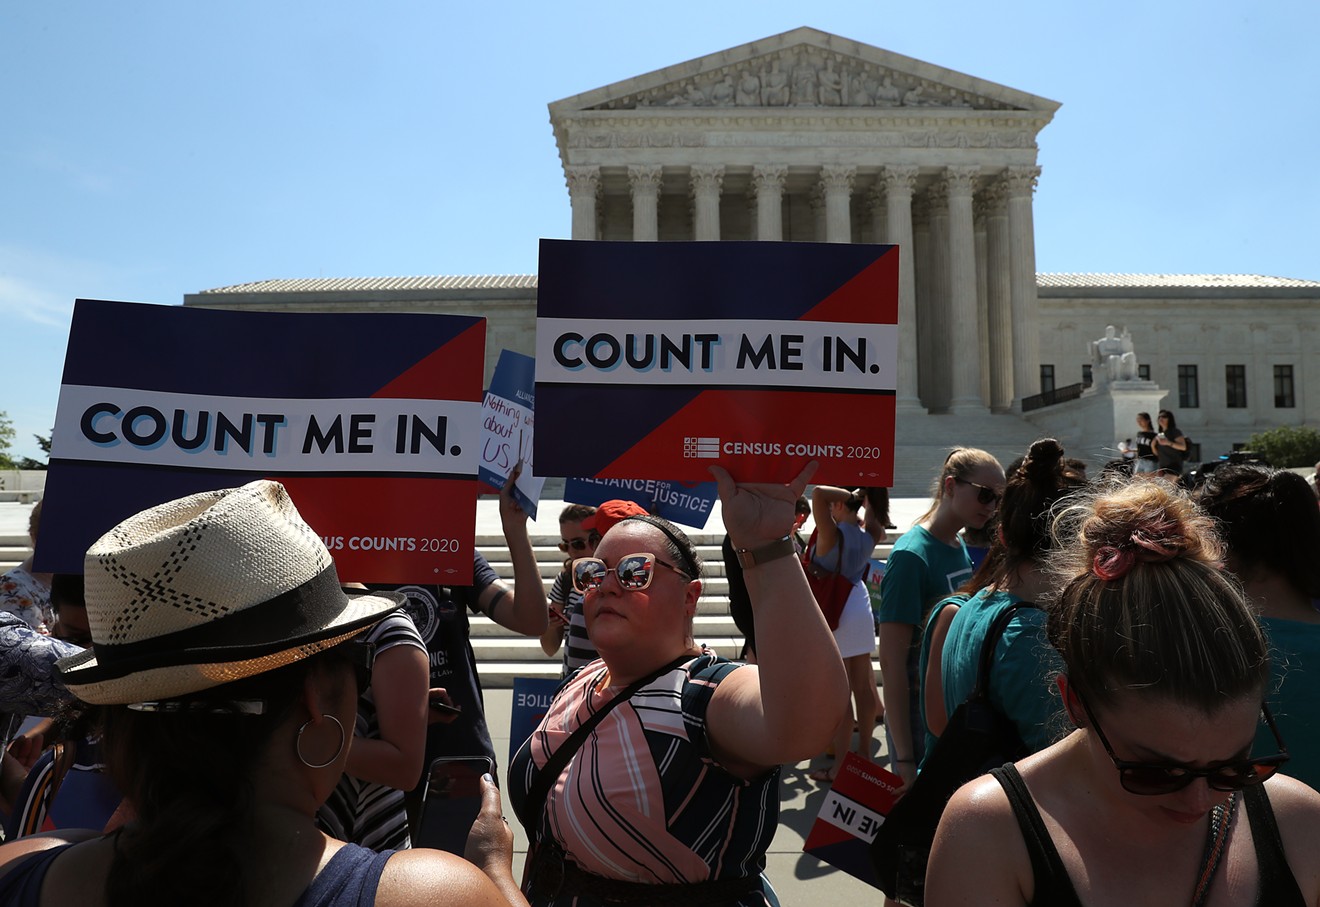 Activists gathered at the U.S. Supreme Court last month ahead of an anticipated decision regarding the use of a so-called citizenship question on the 2020 census.